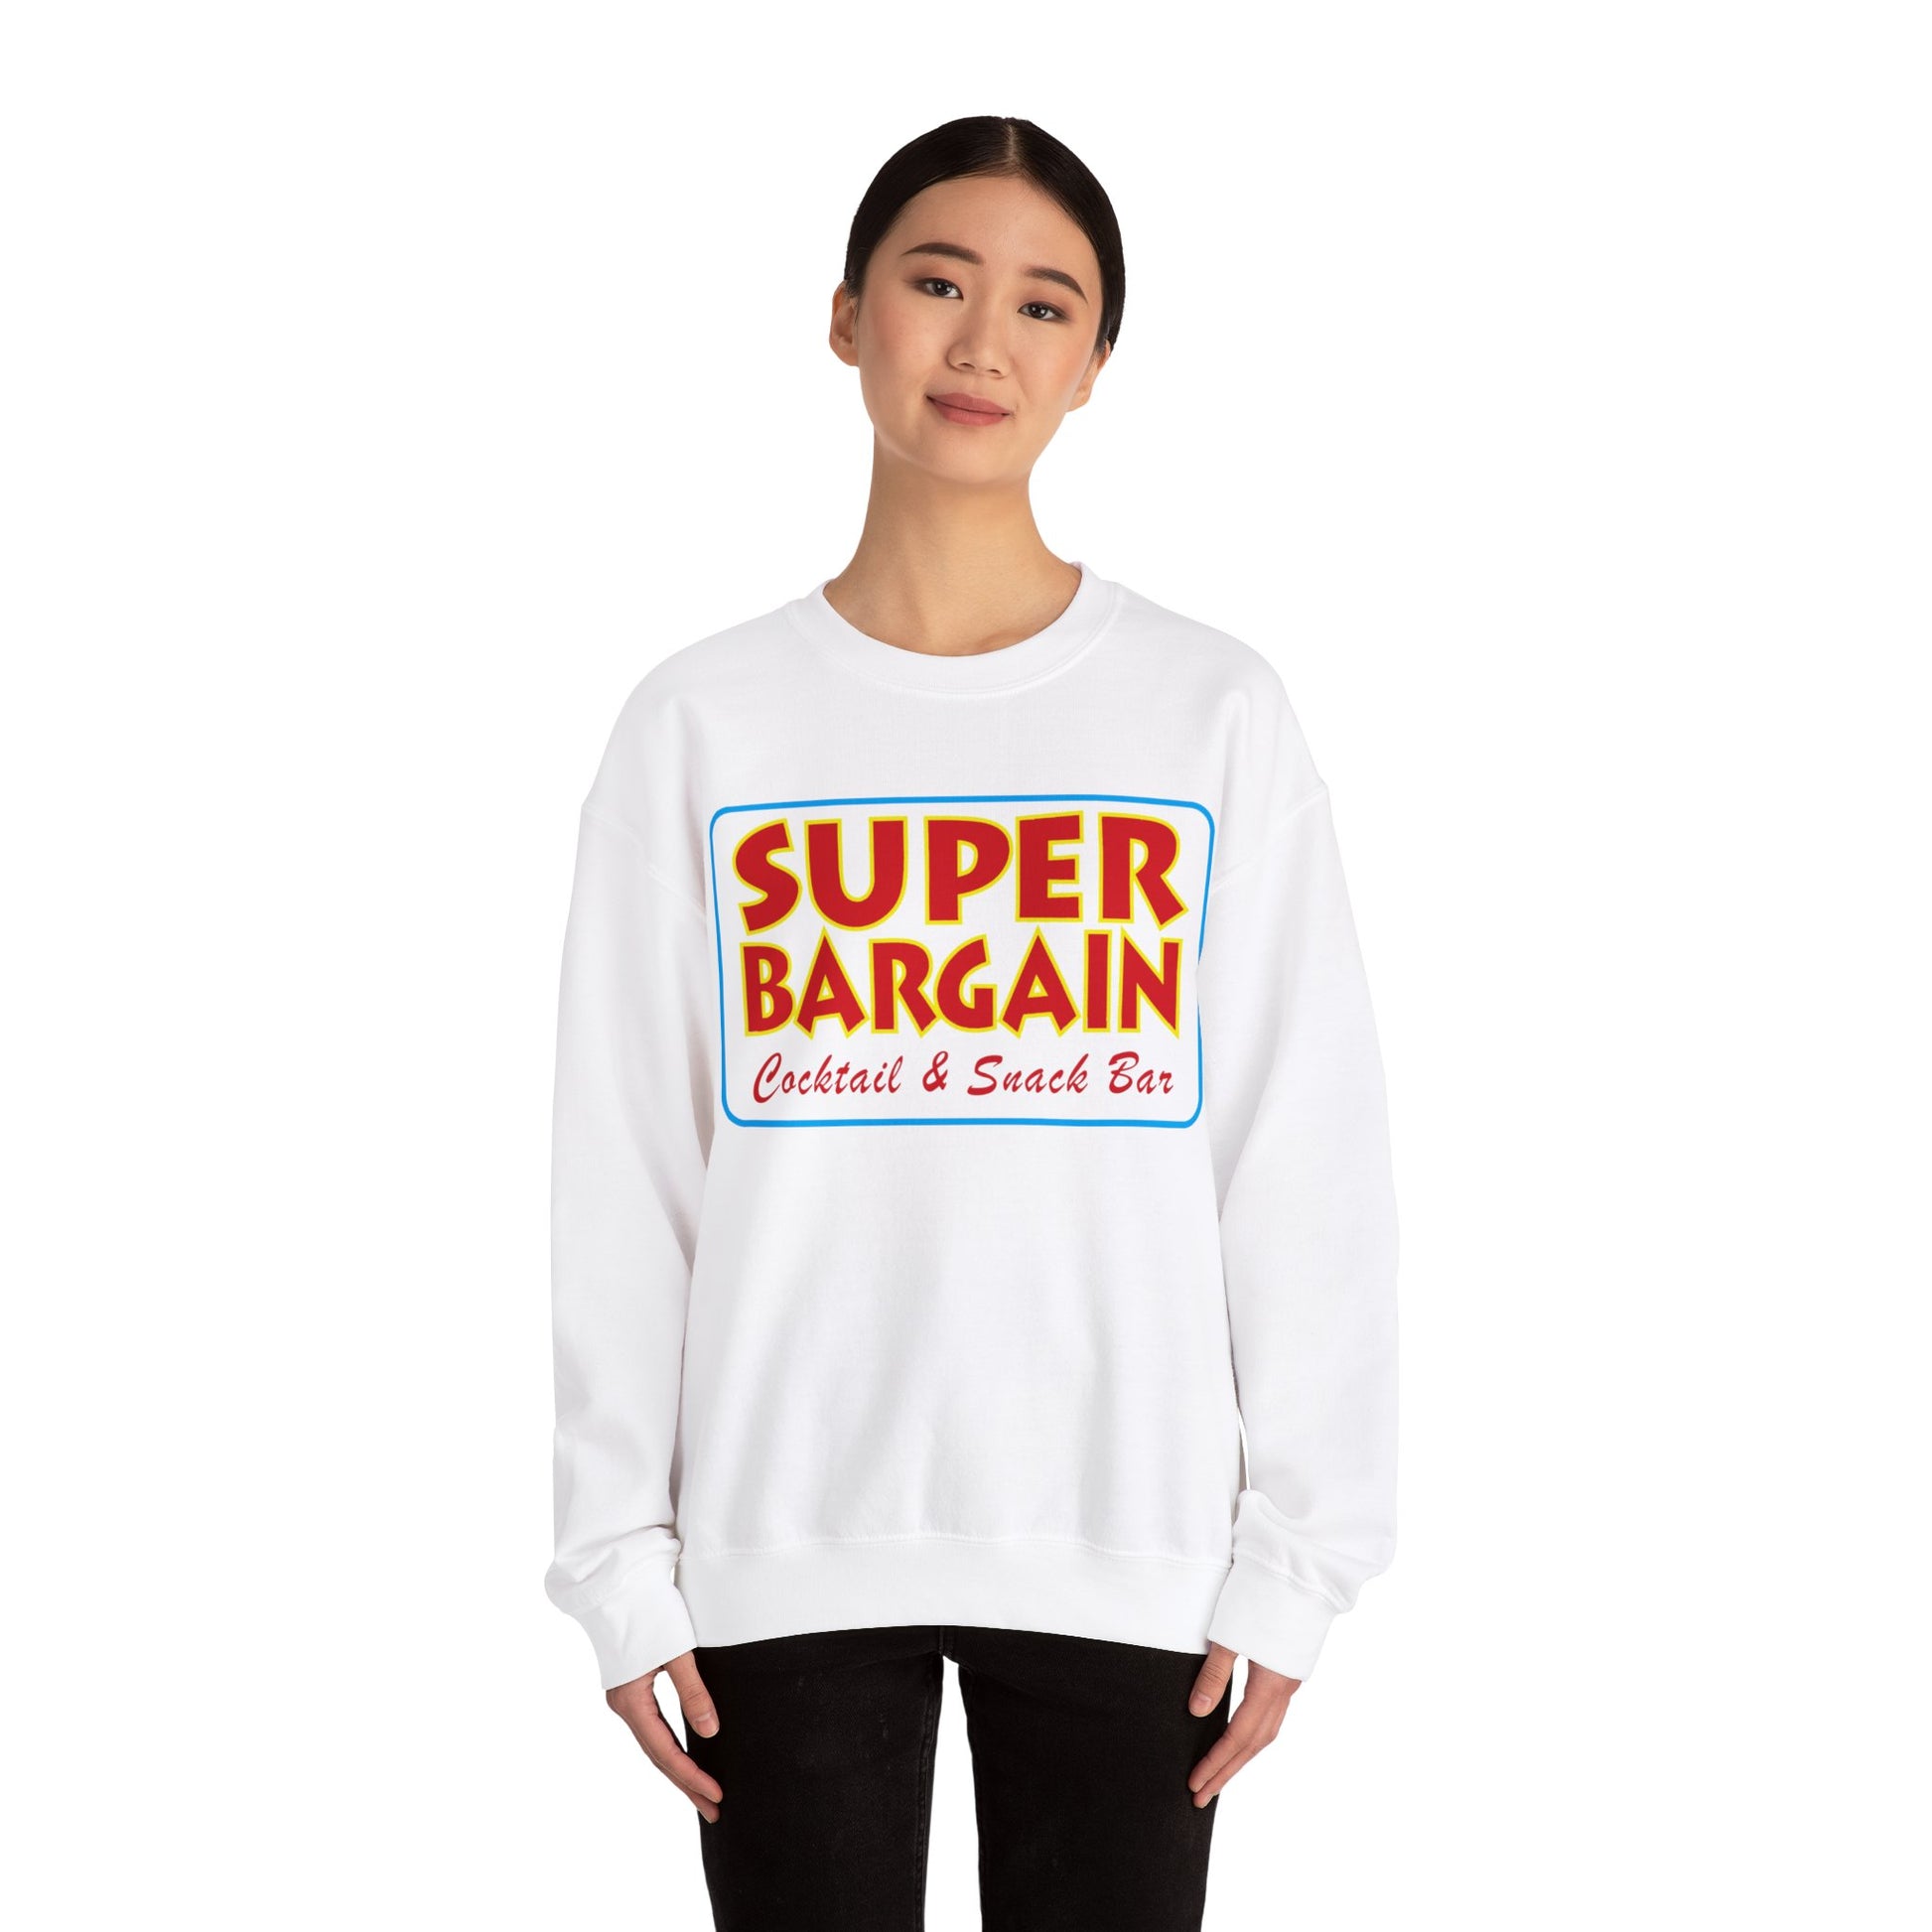 A woman wearing a white Unisex Heavy Blend™ Crewneck Signature Logo Sweatshirt from Printify, with the colorful text "SUPER BARGAIN Cocktail & Snack Bar, Cabbagetown Toronto" printed on the front, standing against a plain background.